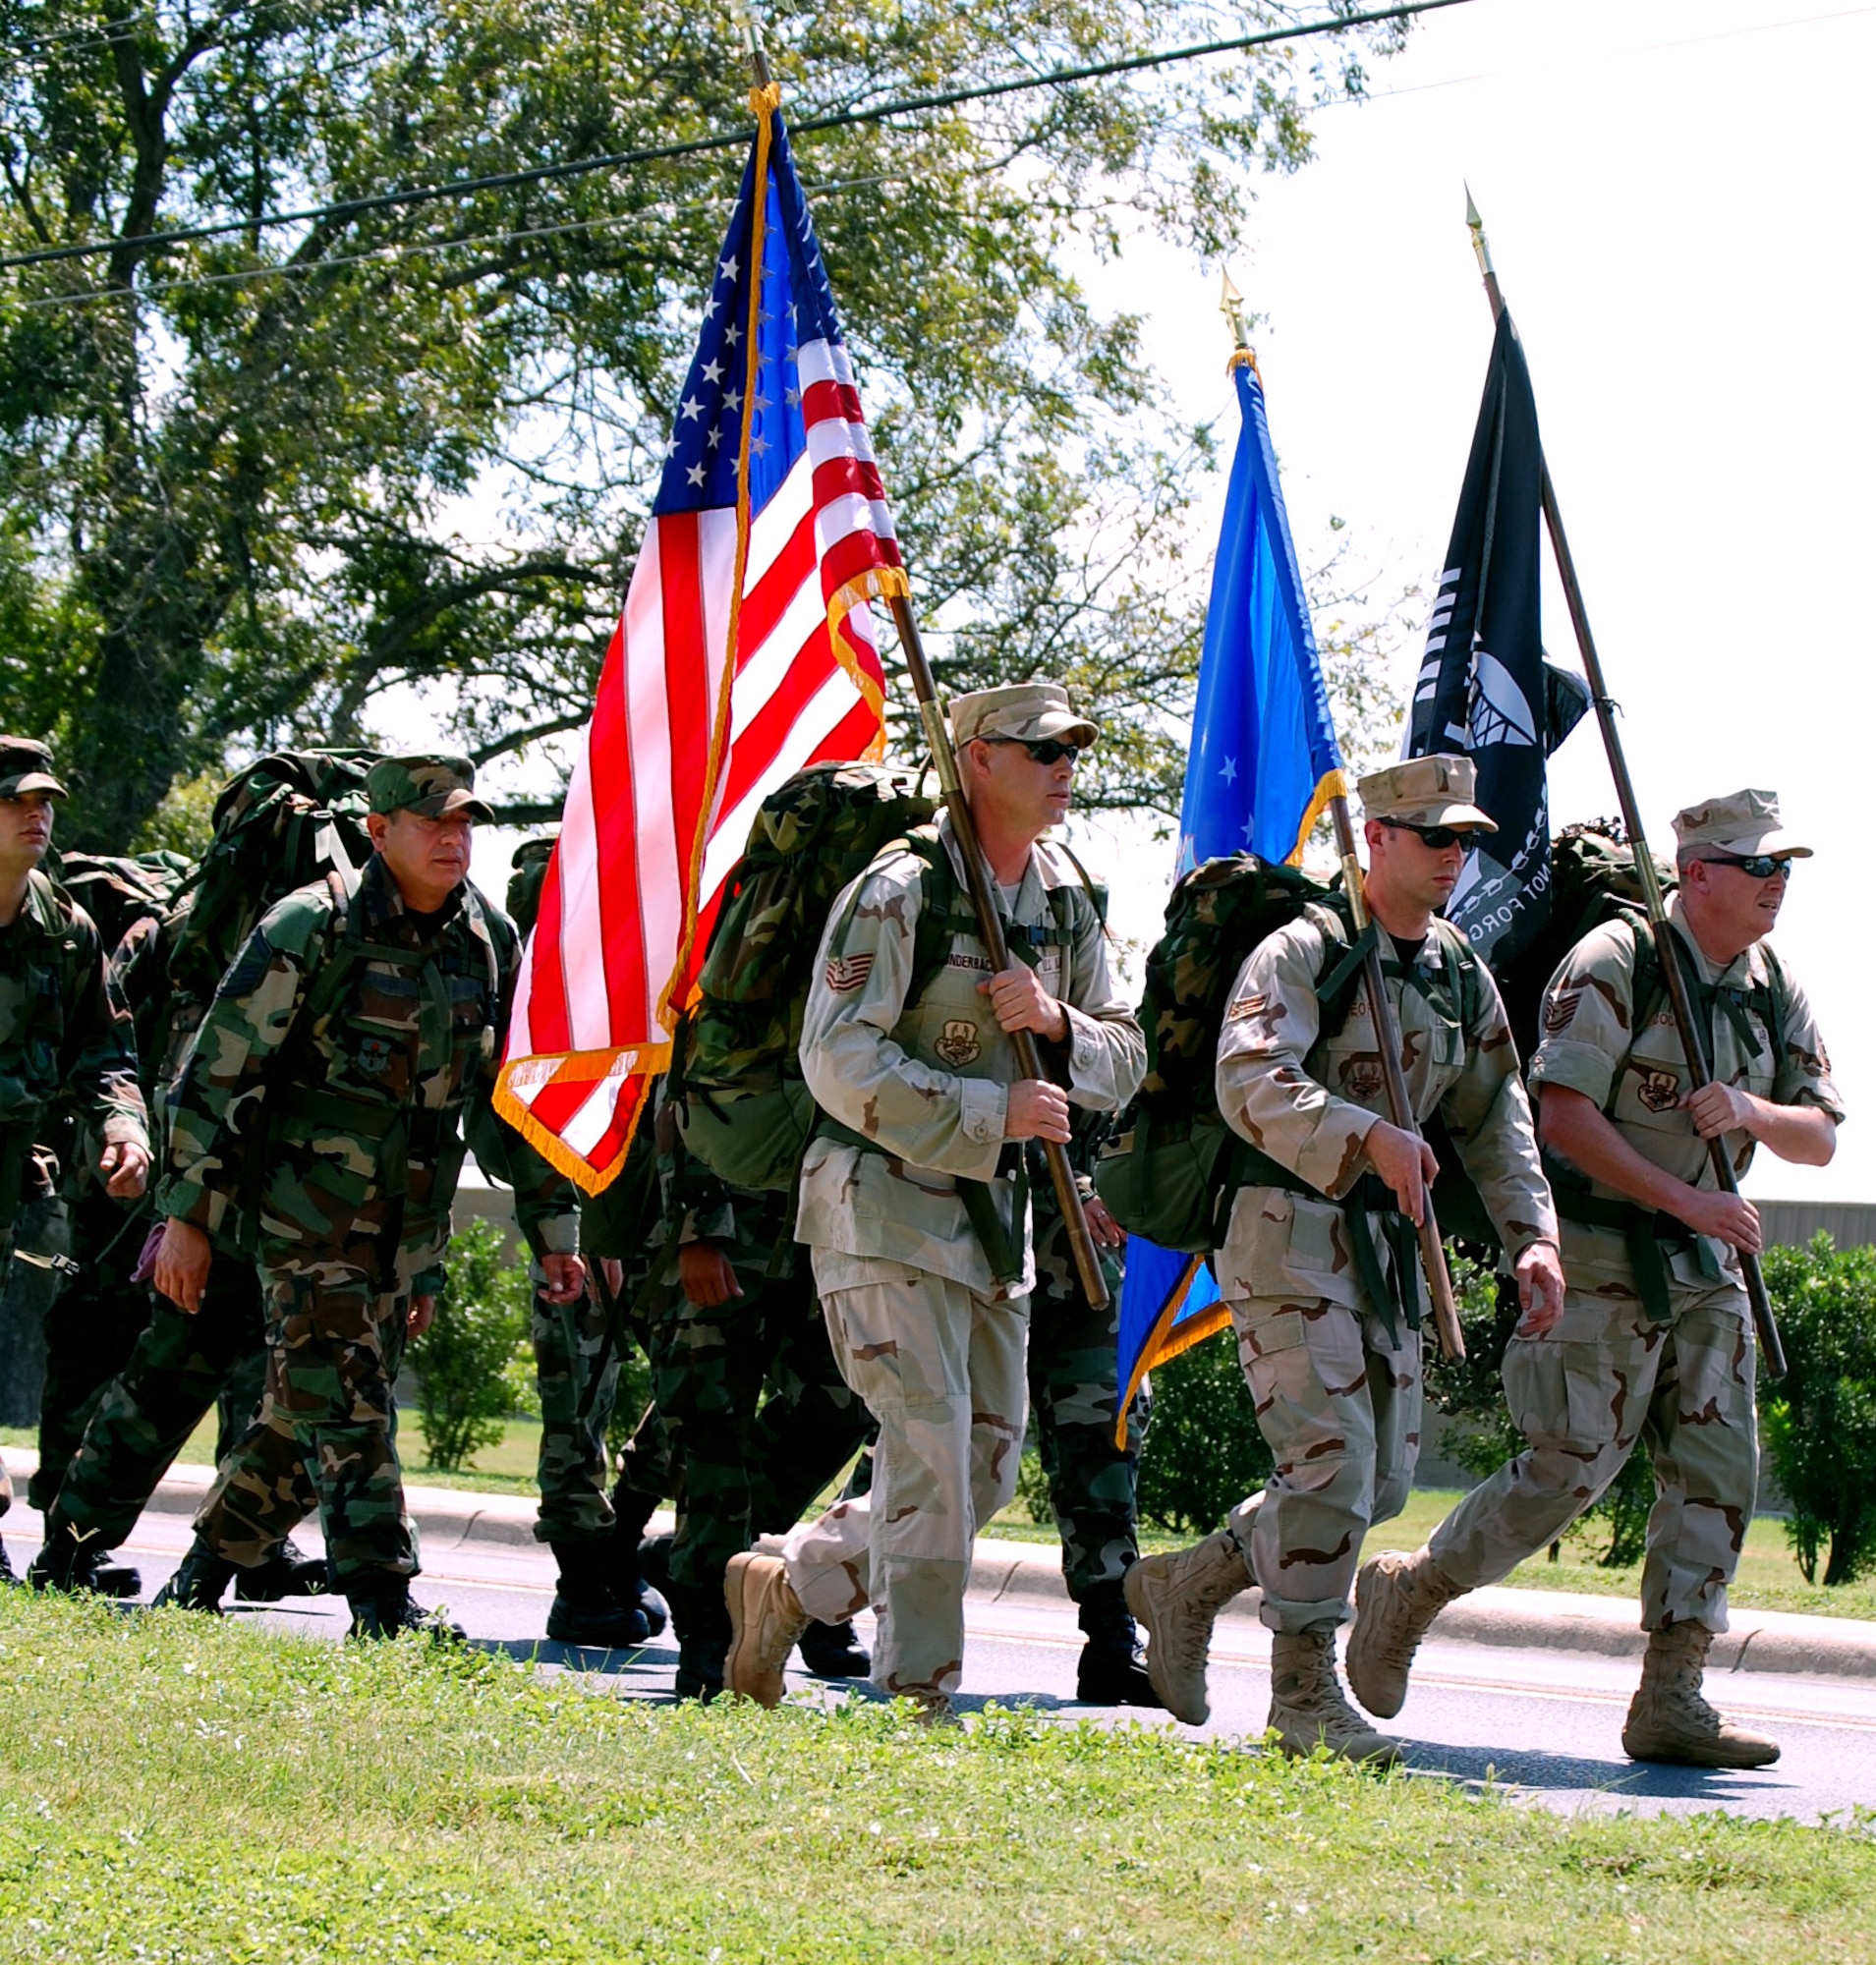 LAUGHLIN AIR FORCE BASE, Texas – Tech Sgt. Thomas Cooper, Senior Airman Forrest George, and Tech Sgt. Frank Munderback, 47th Security Forces Squadron, lead a group of more than nearly 50 from Laughlin on a 7 mile walk from base to the Dr. Alfredo Gutierrez Jr. Amphitheatre, Del Rio, Texas, Sept. 21 for the National POW/MIA Recognition ceremony. (U.S. Air Force photo by Airman Sara Csurilla)
